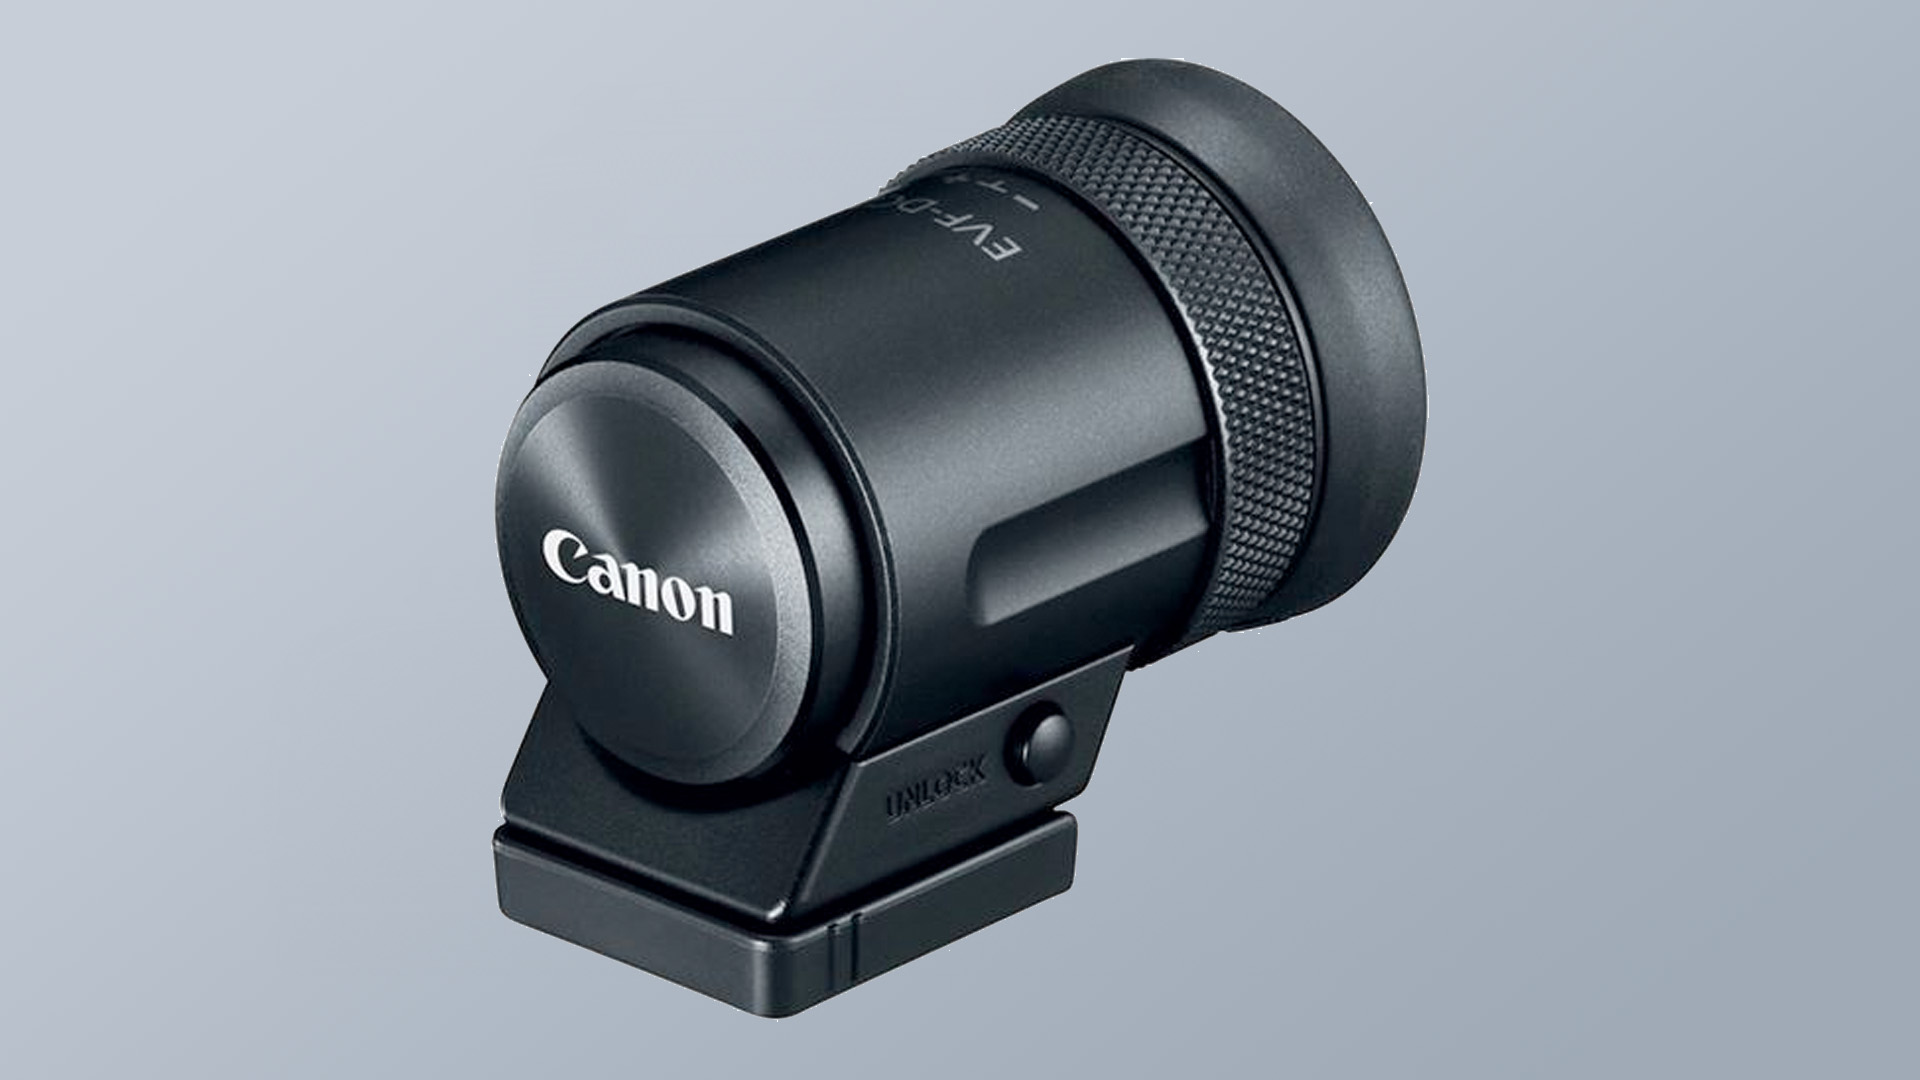 A simulated image of the supposed Canon EOS R100 mirrorless camera